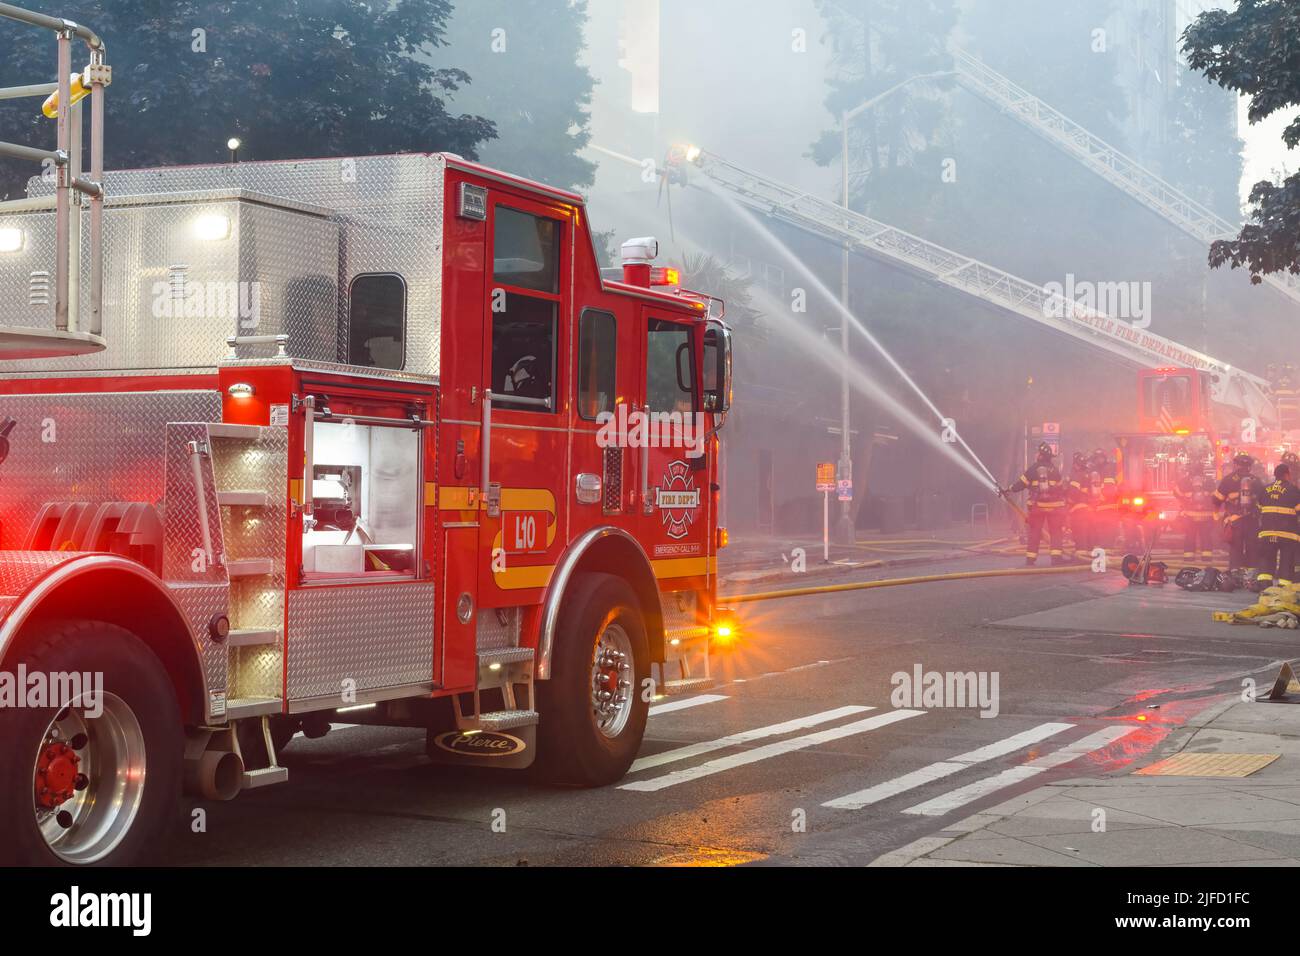 Seattle - June 30, 2022; Seattle fire department fighting an active fire in a smokey scene using ladder trucks and hoses with water streams Stock Photo